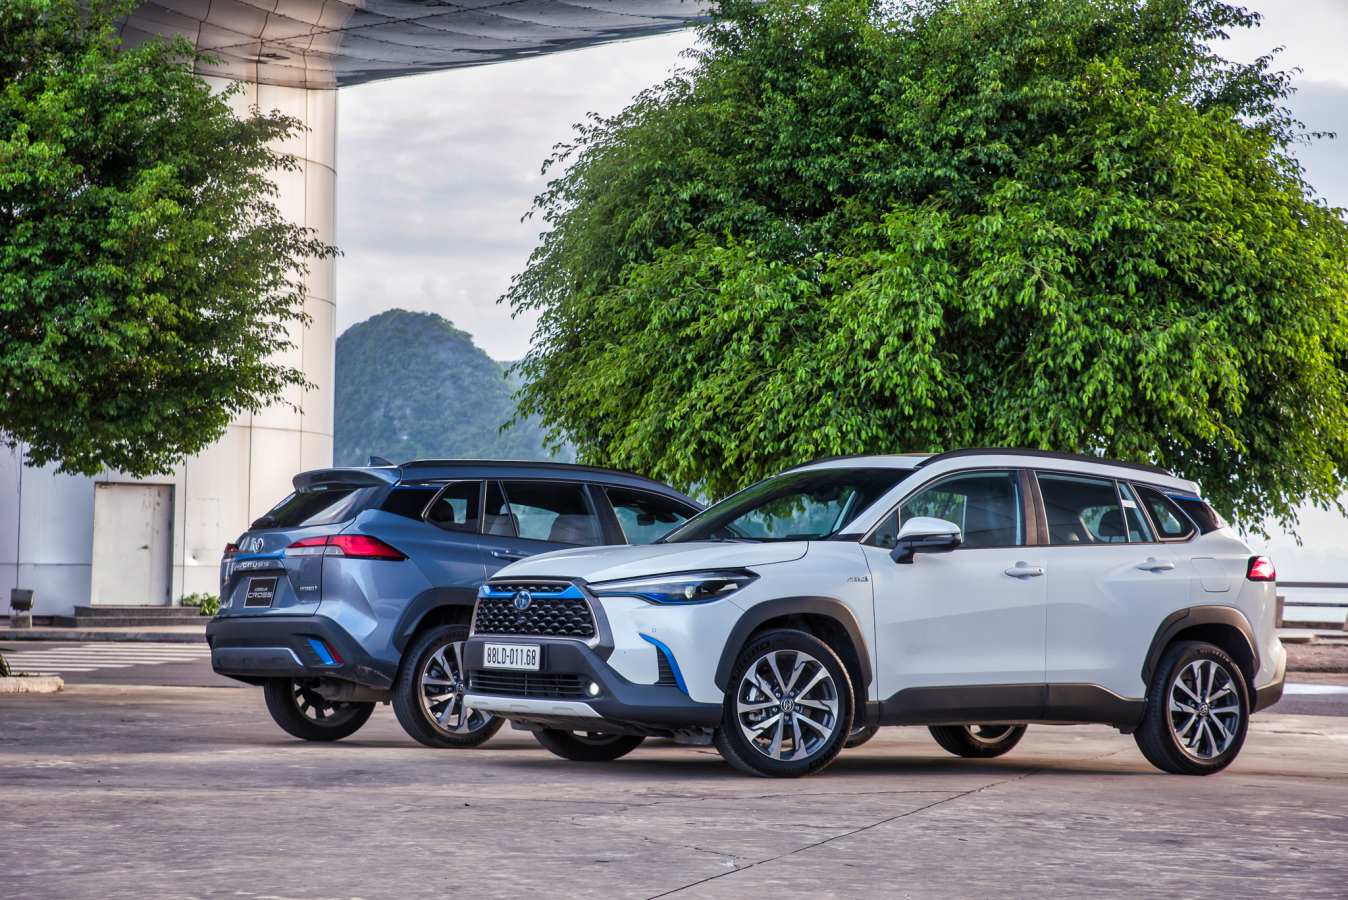 dam-chat-song-cung-hanh-trinh-toyota-suv-2020